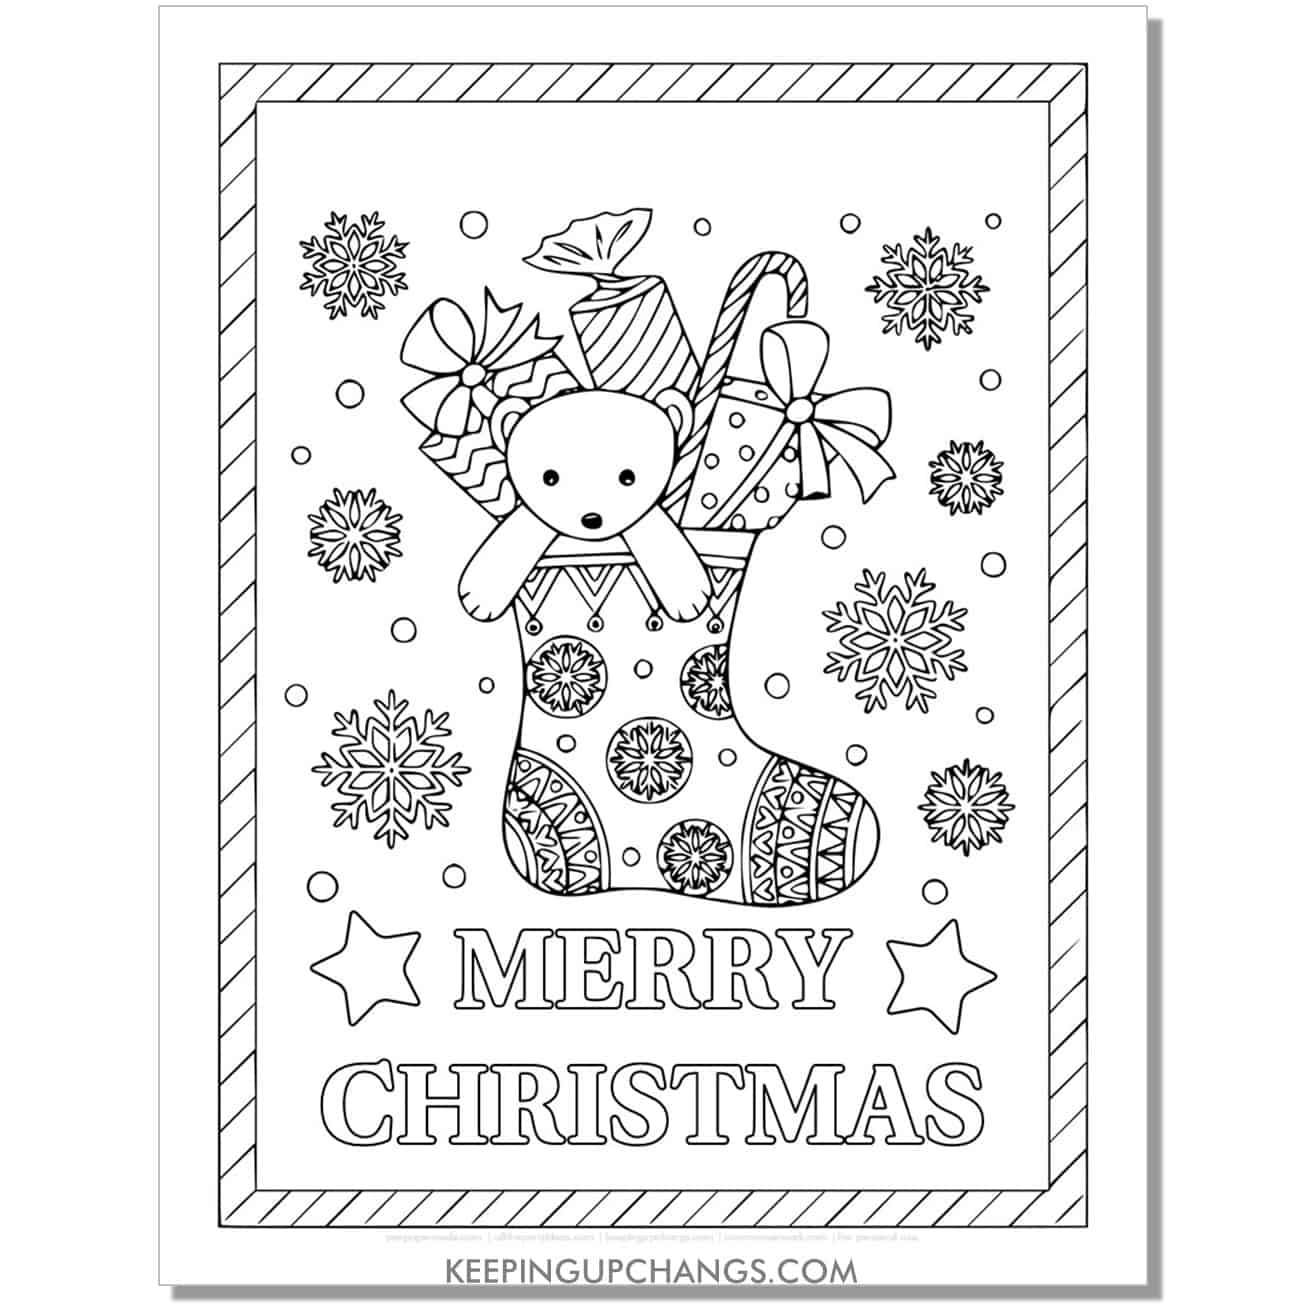 free snowflake zentangle teddy bear merry christmas stocking coloring page.